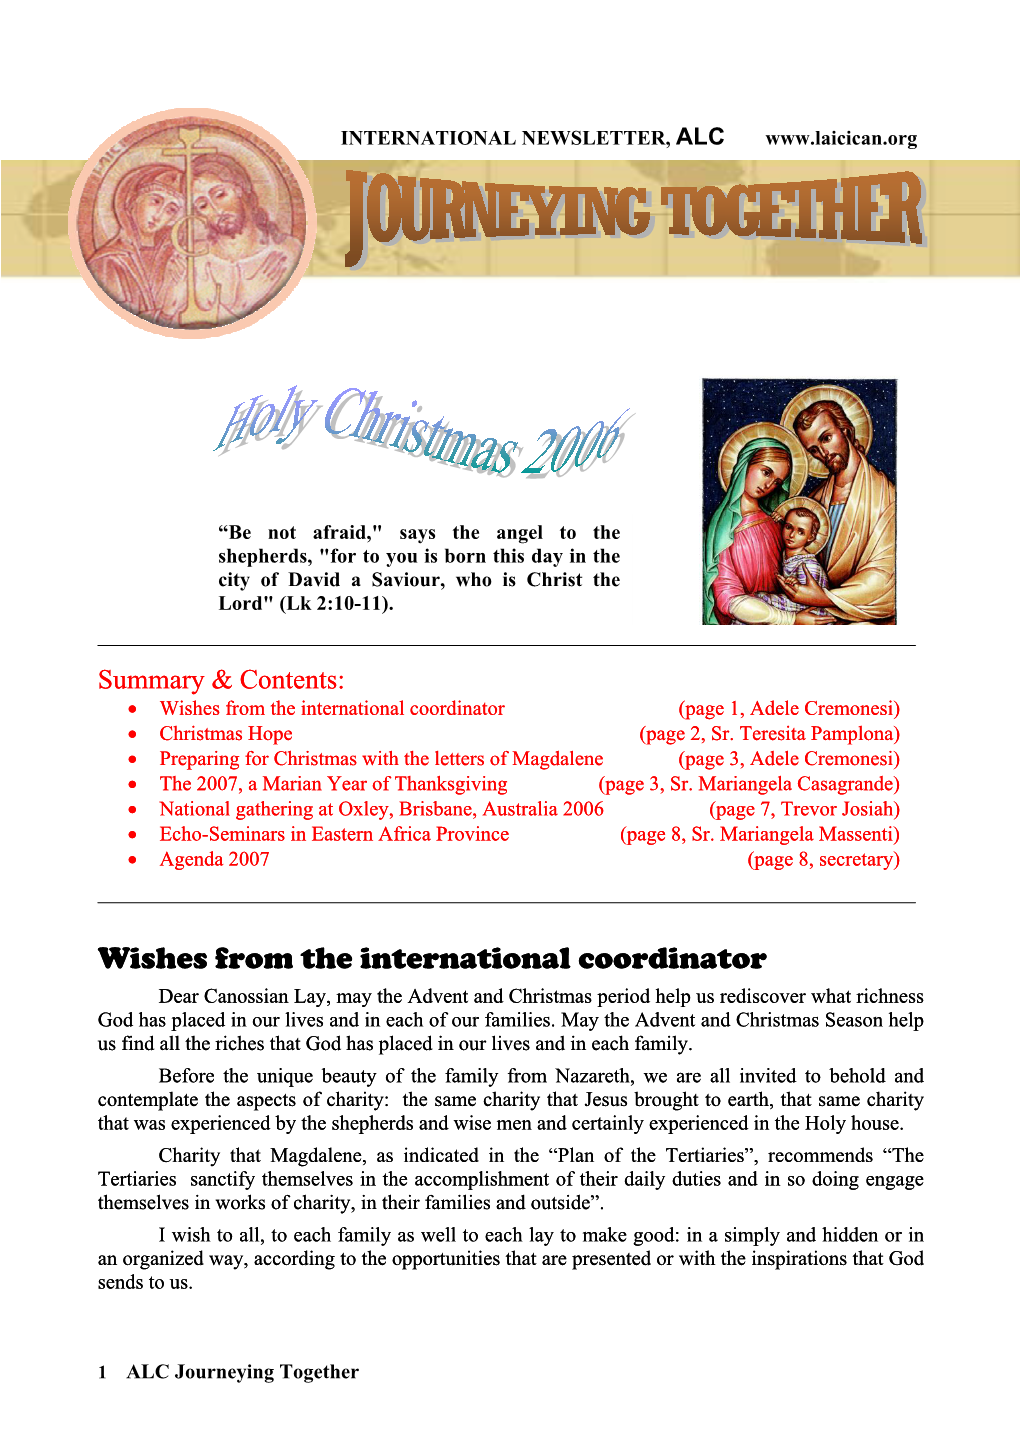 Wishes from the International Coordinator (Page 1, Adele Cremonesi) • Christmas Hope (Page 2, Sr